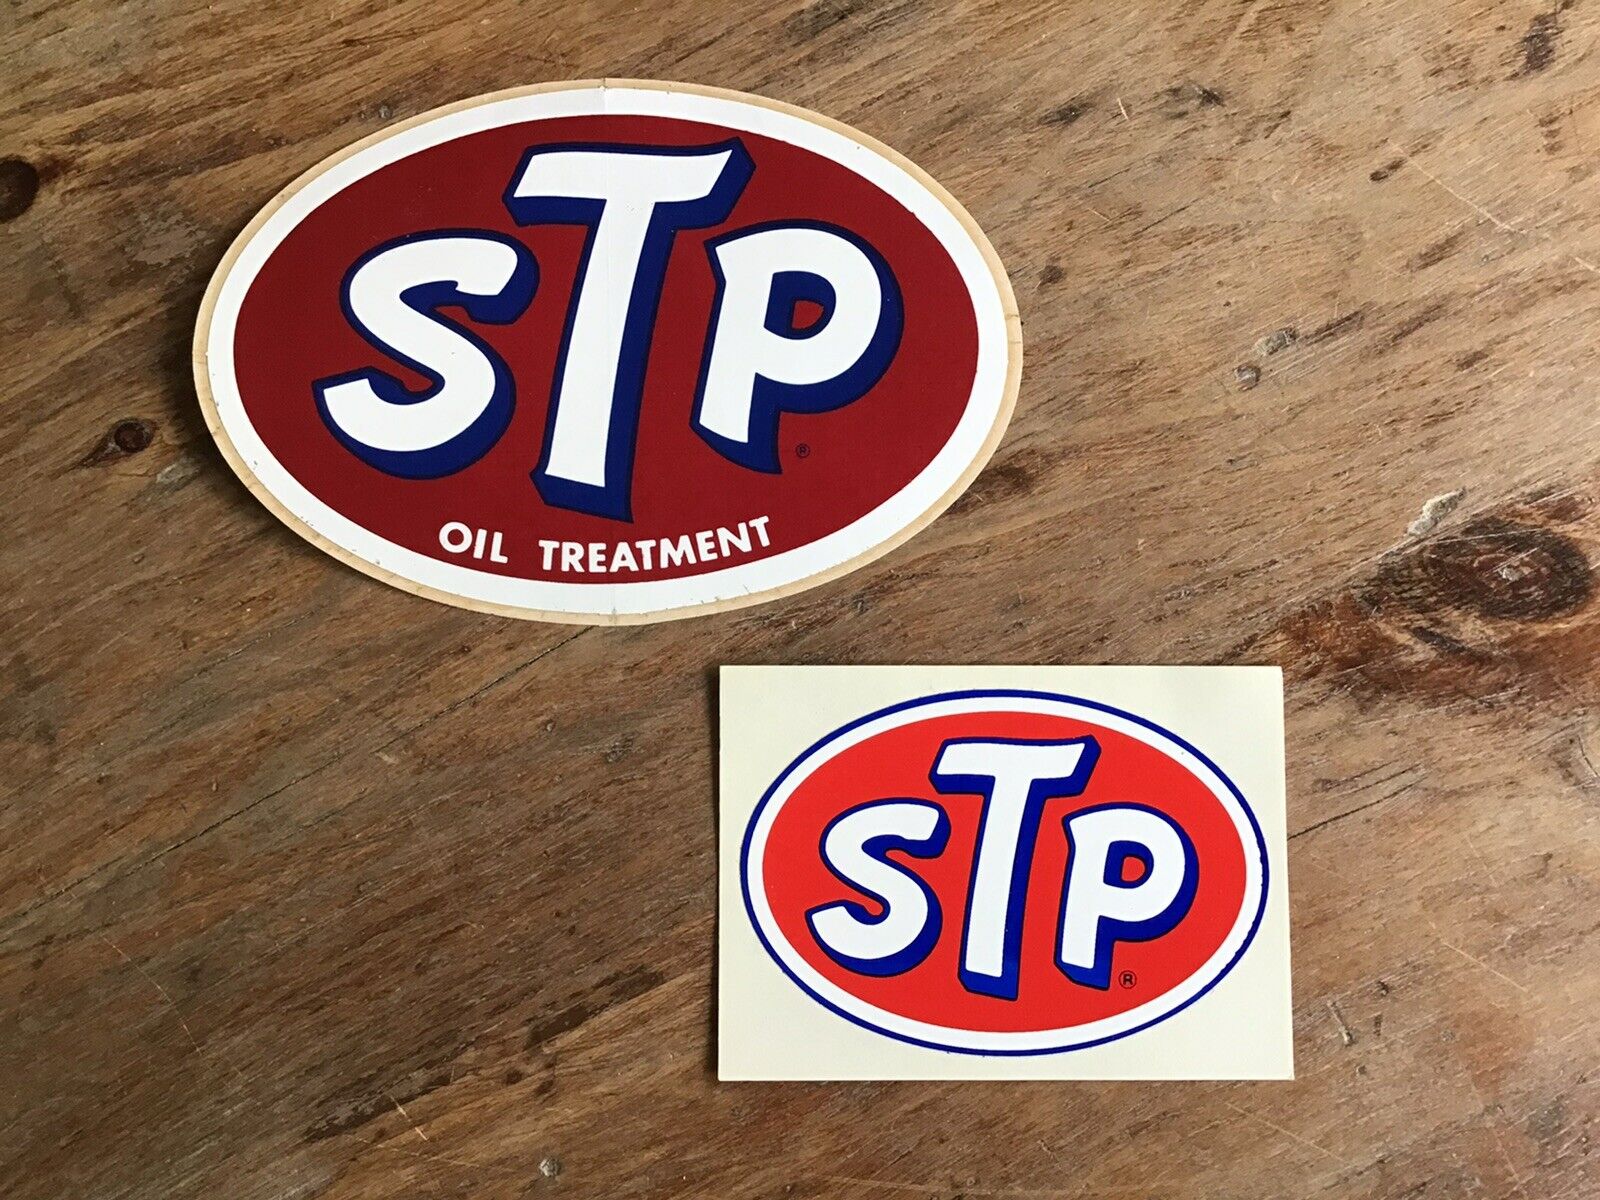 Lot of 2 NOS Vintage STP OIL TREATMENT Decal Stickers 1970s Original New